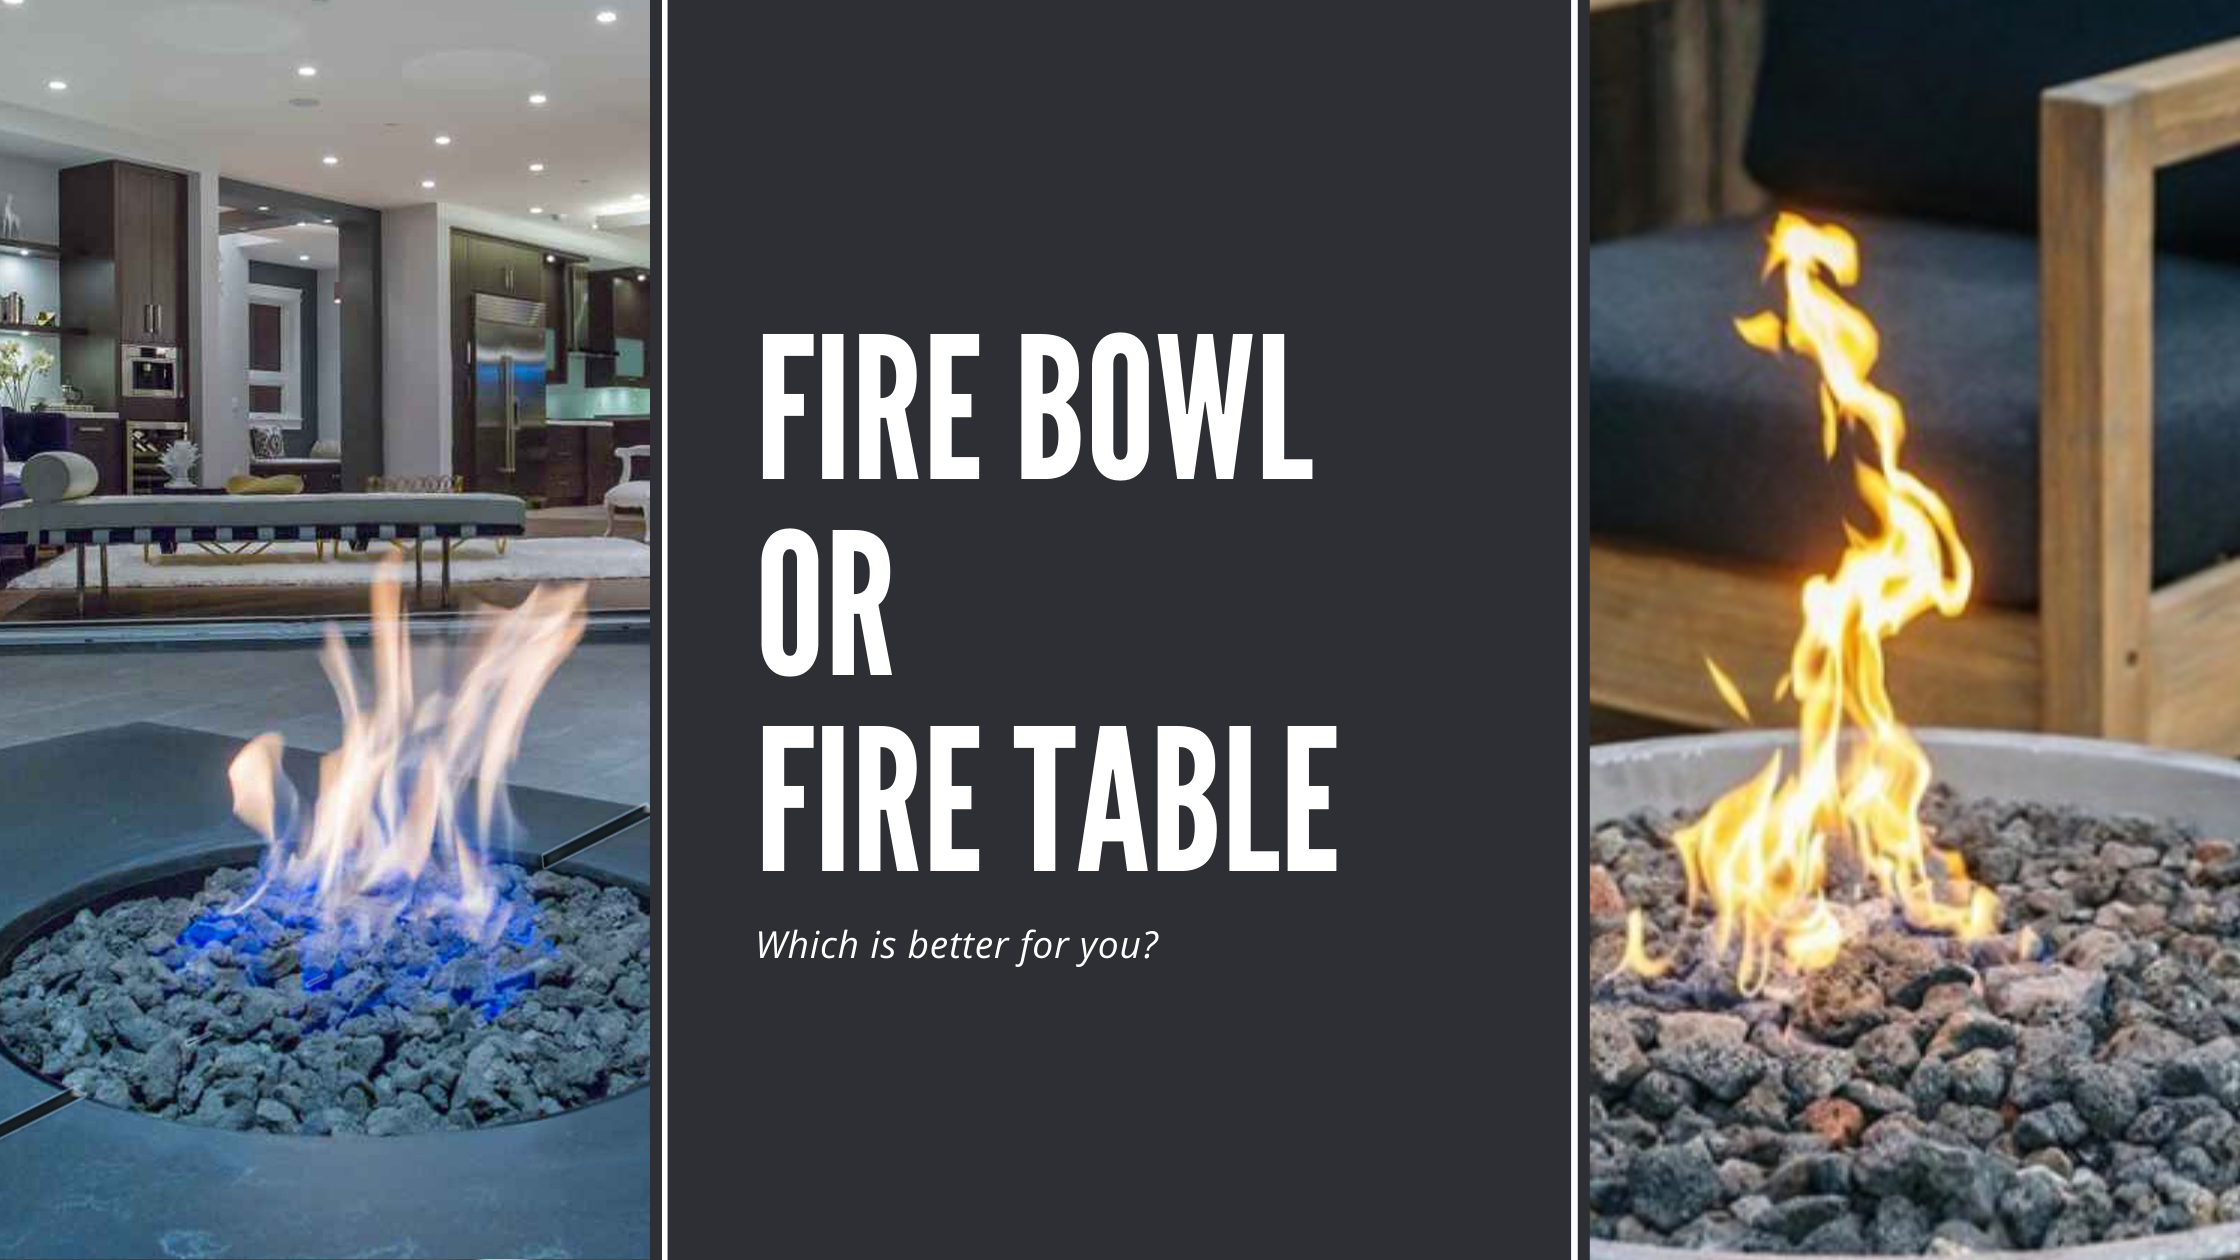 Fire bowl or fire table